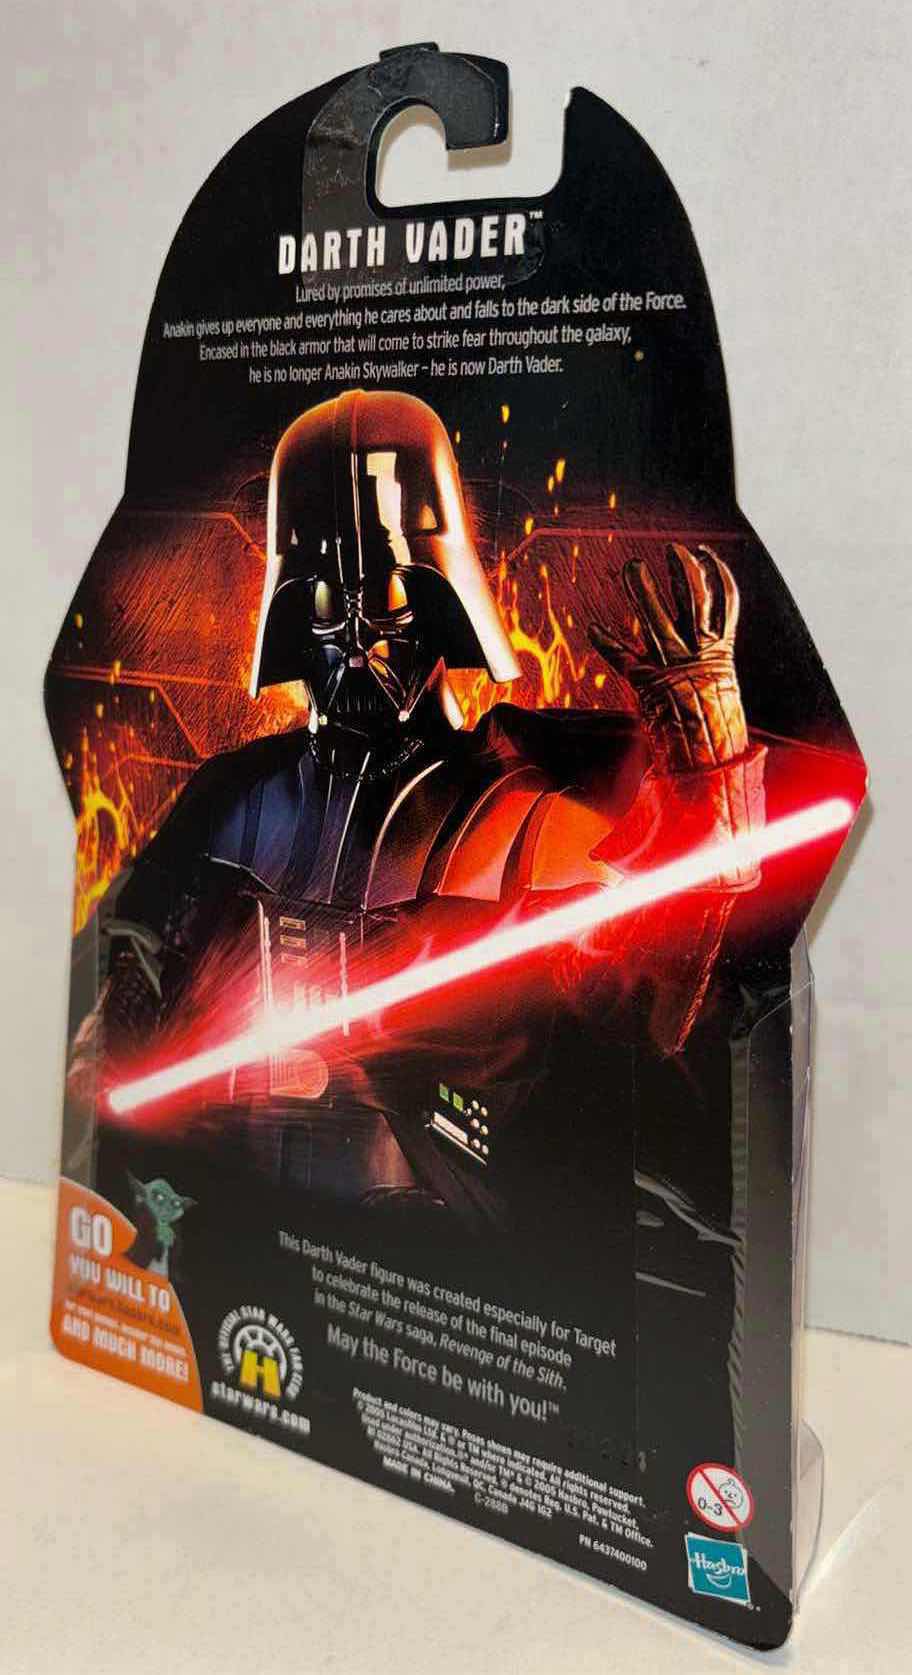 Photo 2 of NEW 2005 HASBRO STAR WARS REVENGE OF THE SITH TARGET EXCLUSIVE “DARTH VADER” ACTION FIGURE & ACCESSORIES, EXCLUSIVE COLLECTORS EDITION 1 of 50,000 IN CLEAR CLAMSHELL CASE